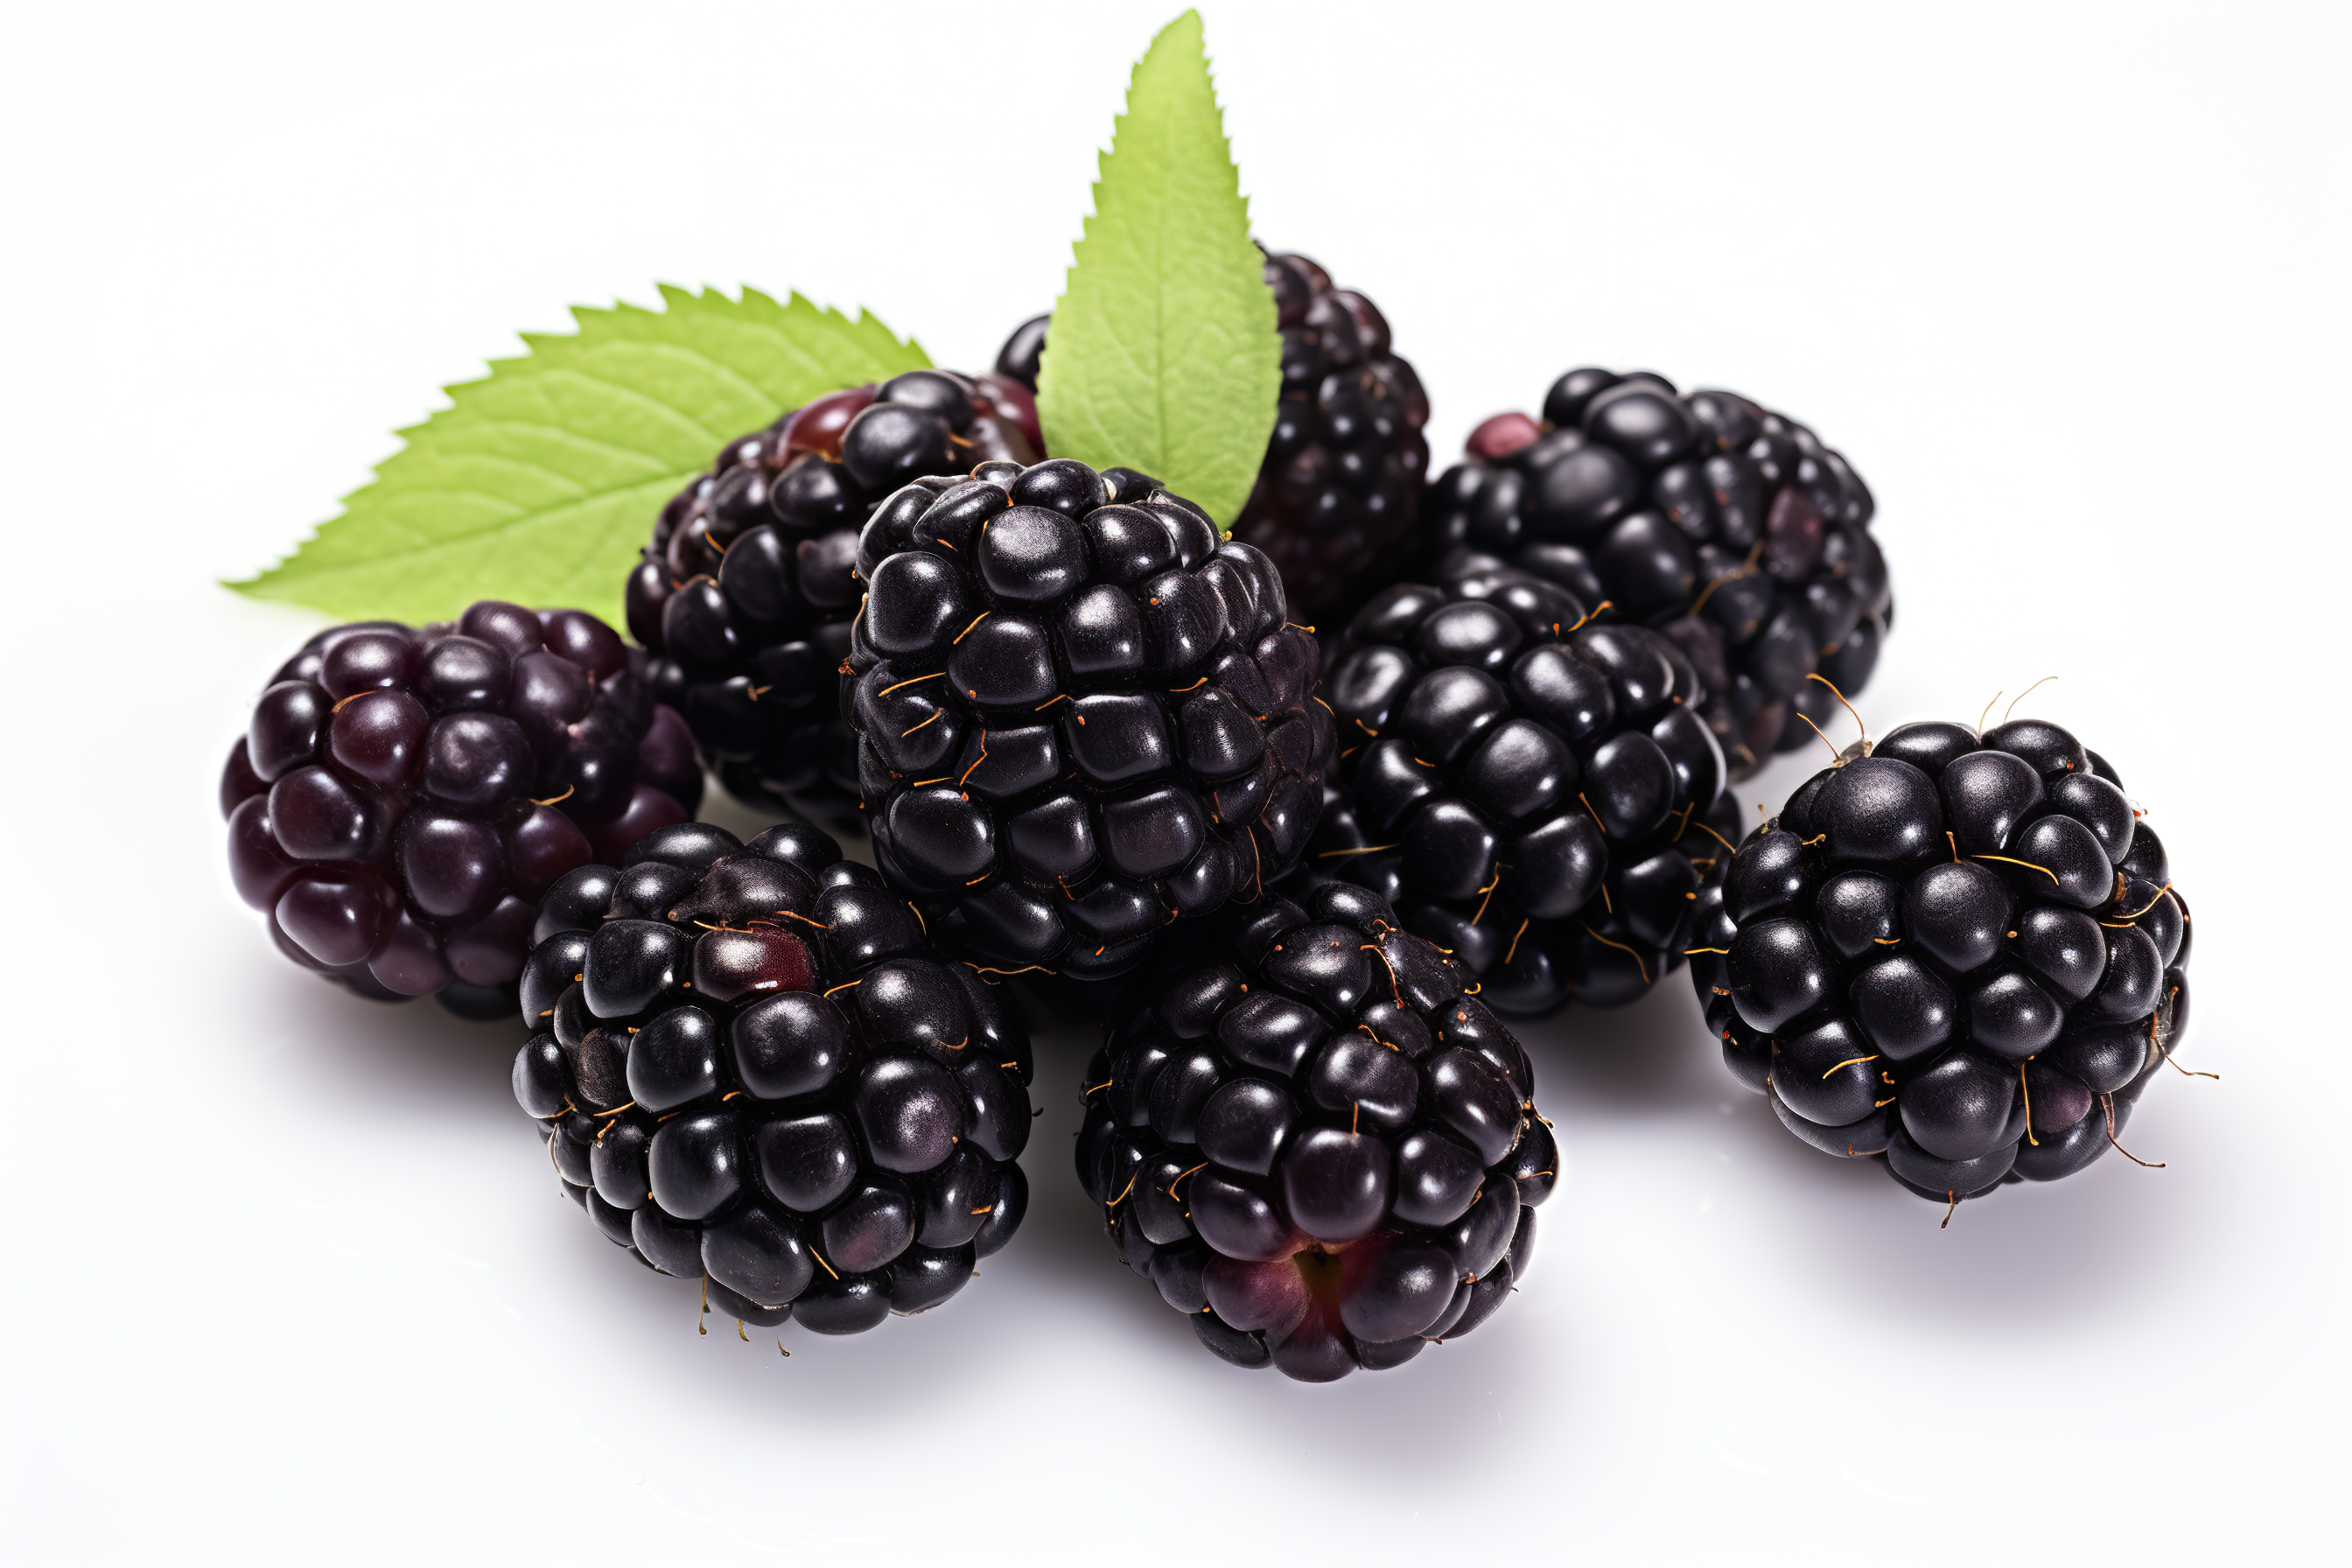 Blackberries with green leaves isolated on white background